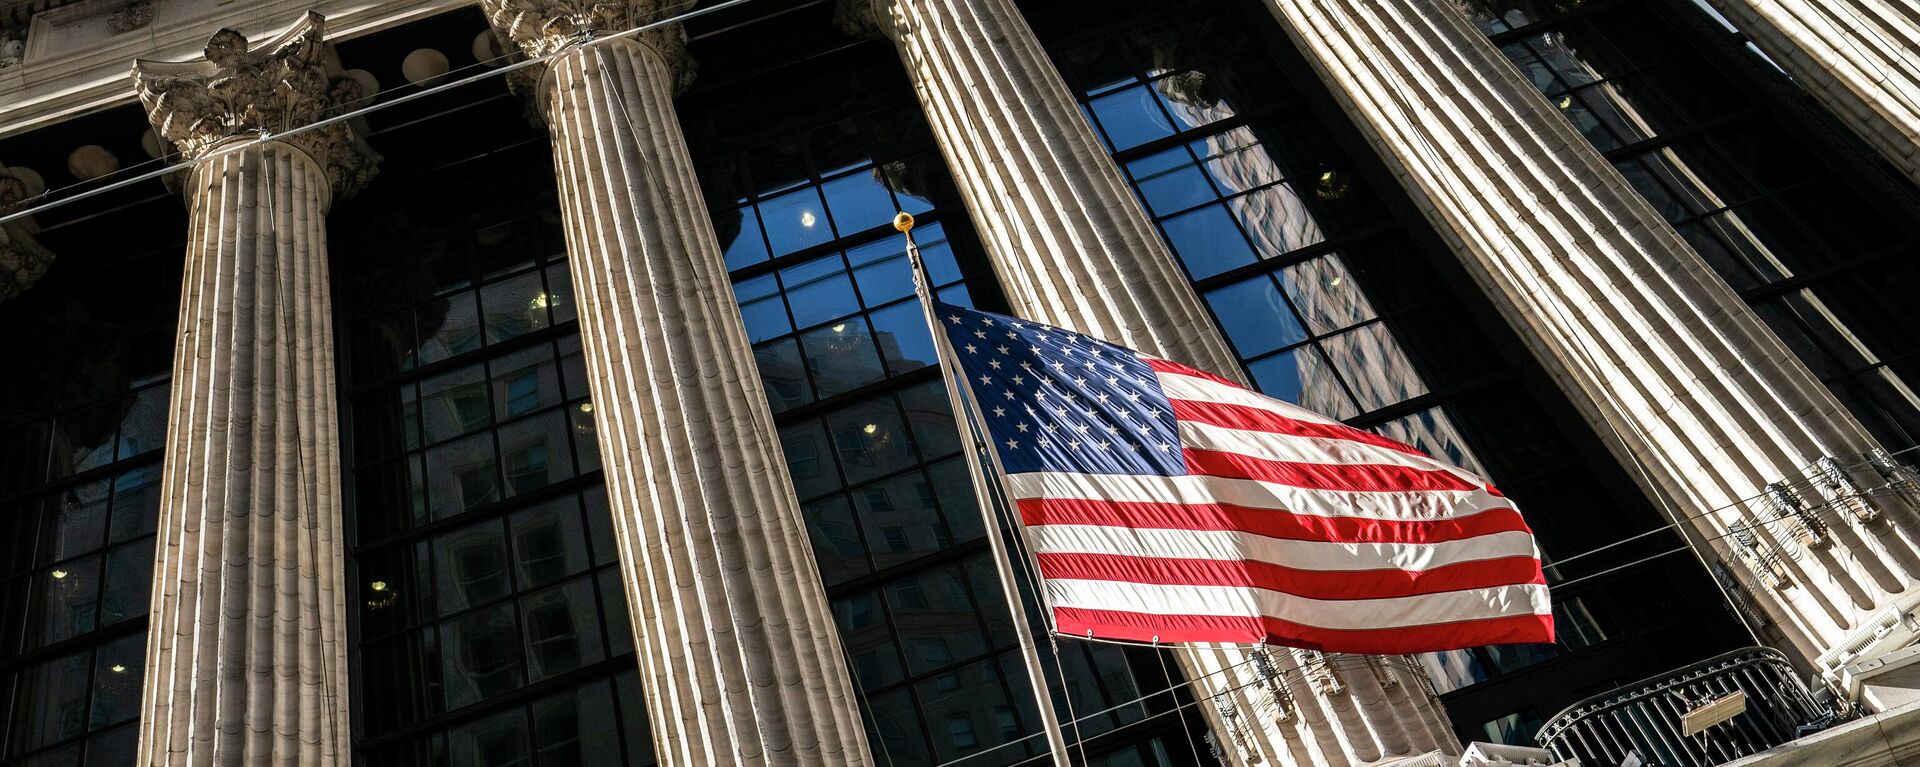 A U.S. flag waves outside the New York Stock Exchange, Monday, Jan. 24, 2022, in New York. Stocks are drifting between small gains and losses in the early going on Wall Street Tuesday, May 3, 2022 as investors await Wednesday's decision by the Federal Reserve on interest rates. The Fed is expected to raise its benchmark rate by twice the usual amount this week as it steps up its fight against inflation, which is at a four-decade high. - Sputnik International, 1920, 17.08.2023